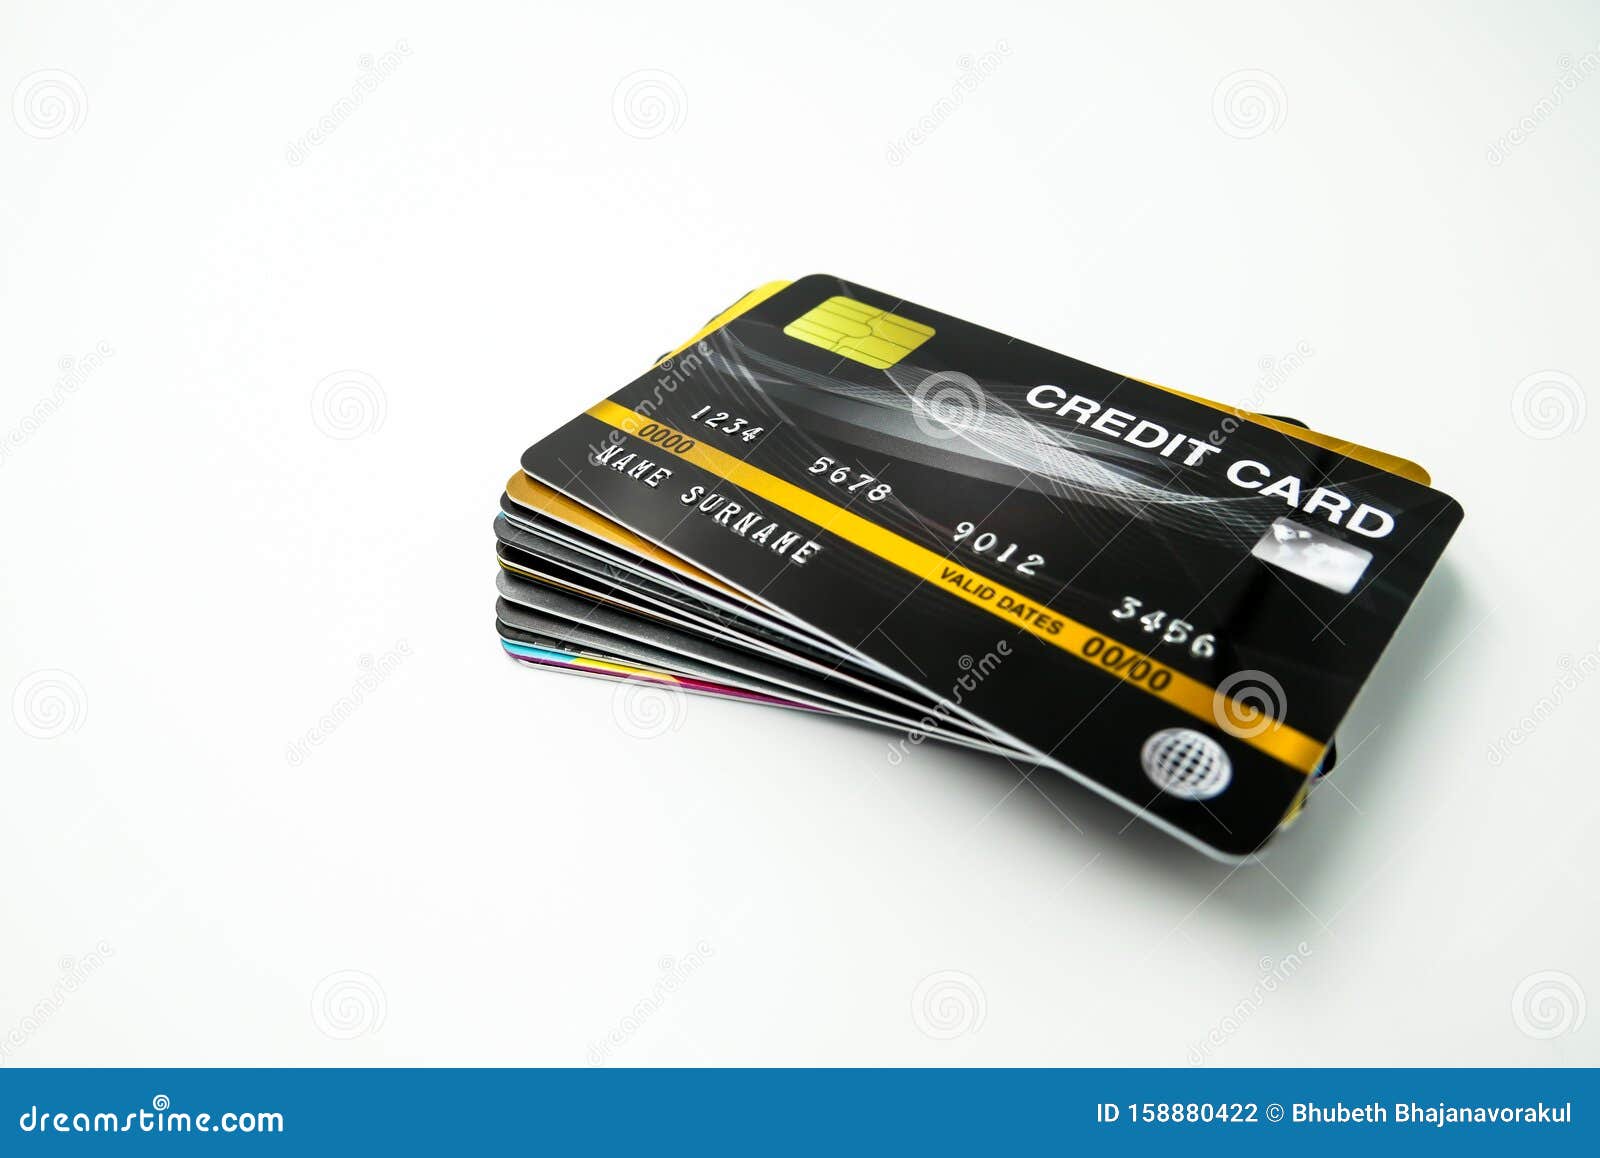 mockup credit card, the popular payment method with plastic and chipcard card close up shot and  on white background